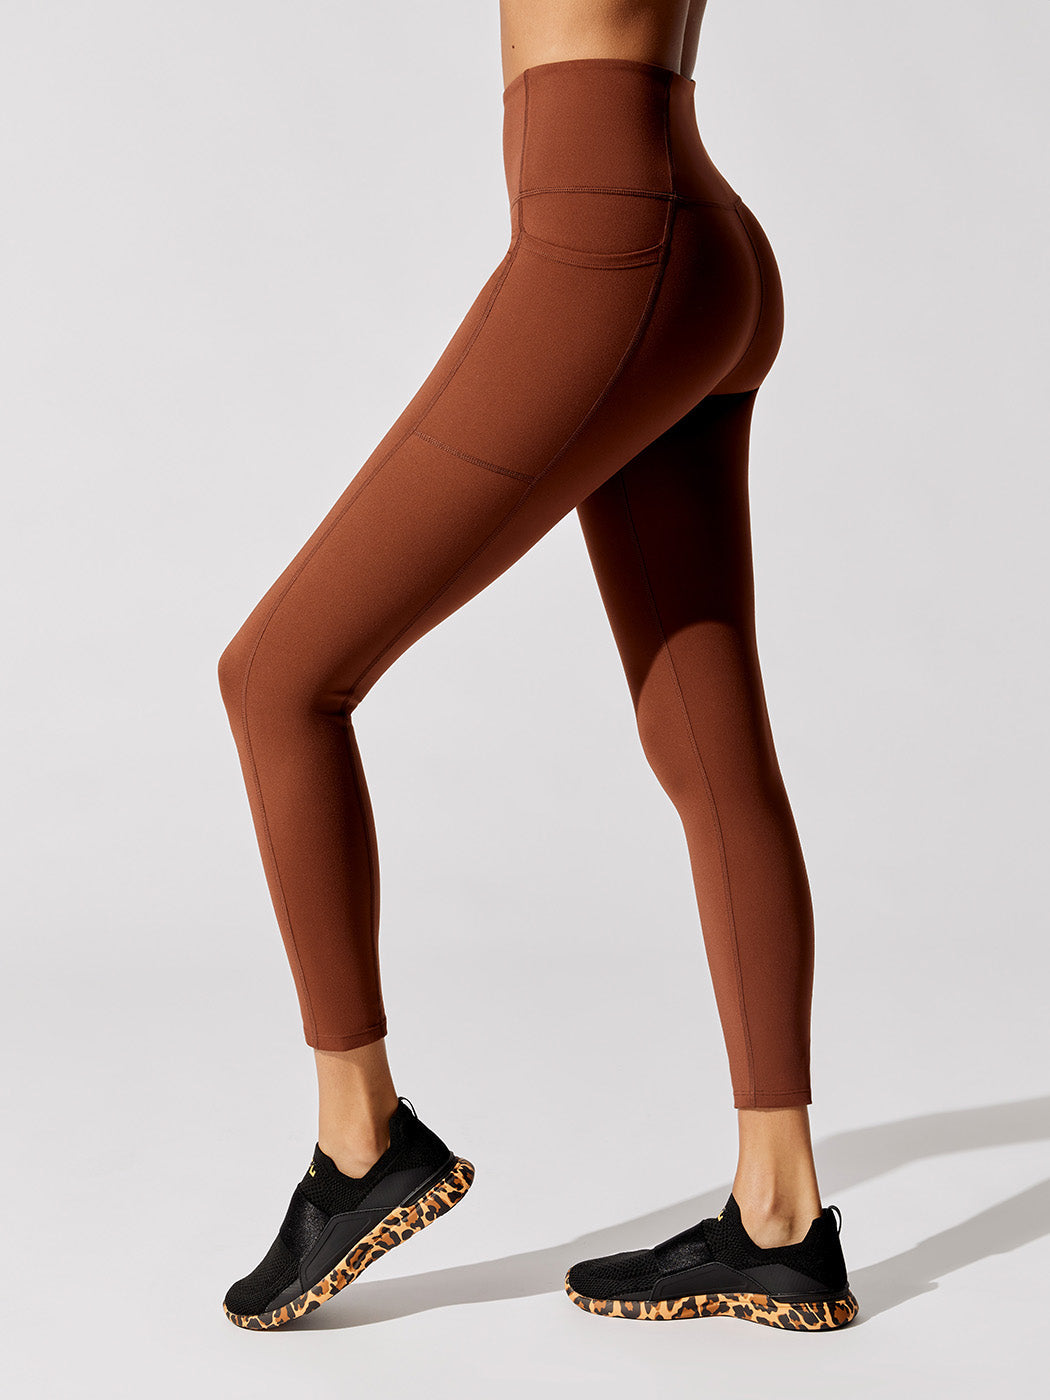 https://internationaldesignforum.com/wp-content/uploads/2022/04/CARB-CRB20166-BRWDBW-high-rise-7-8-legging-with-pockets-in-cloud-compression-Color-CAPPUCCINO.jpg